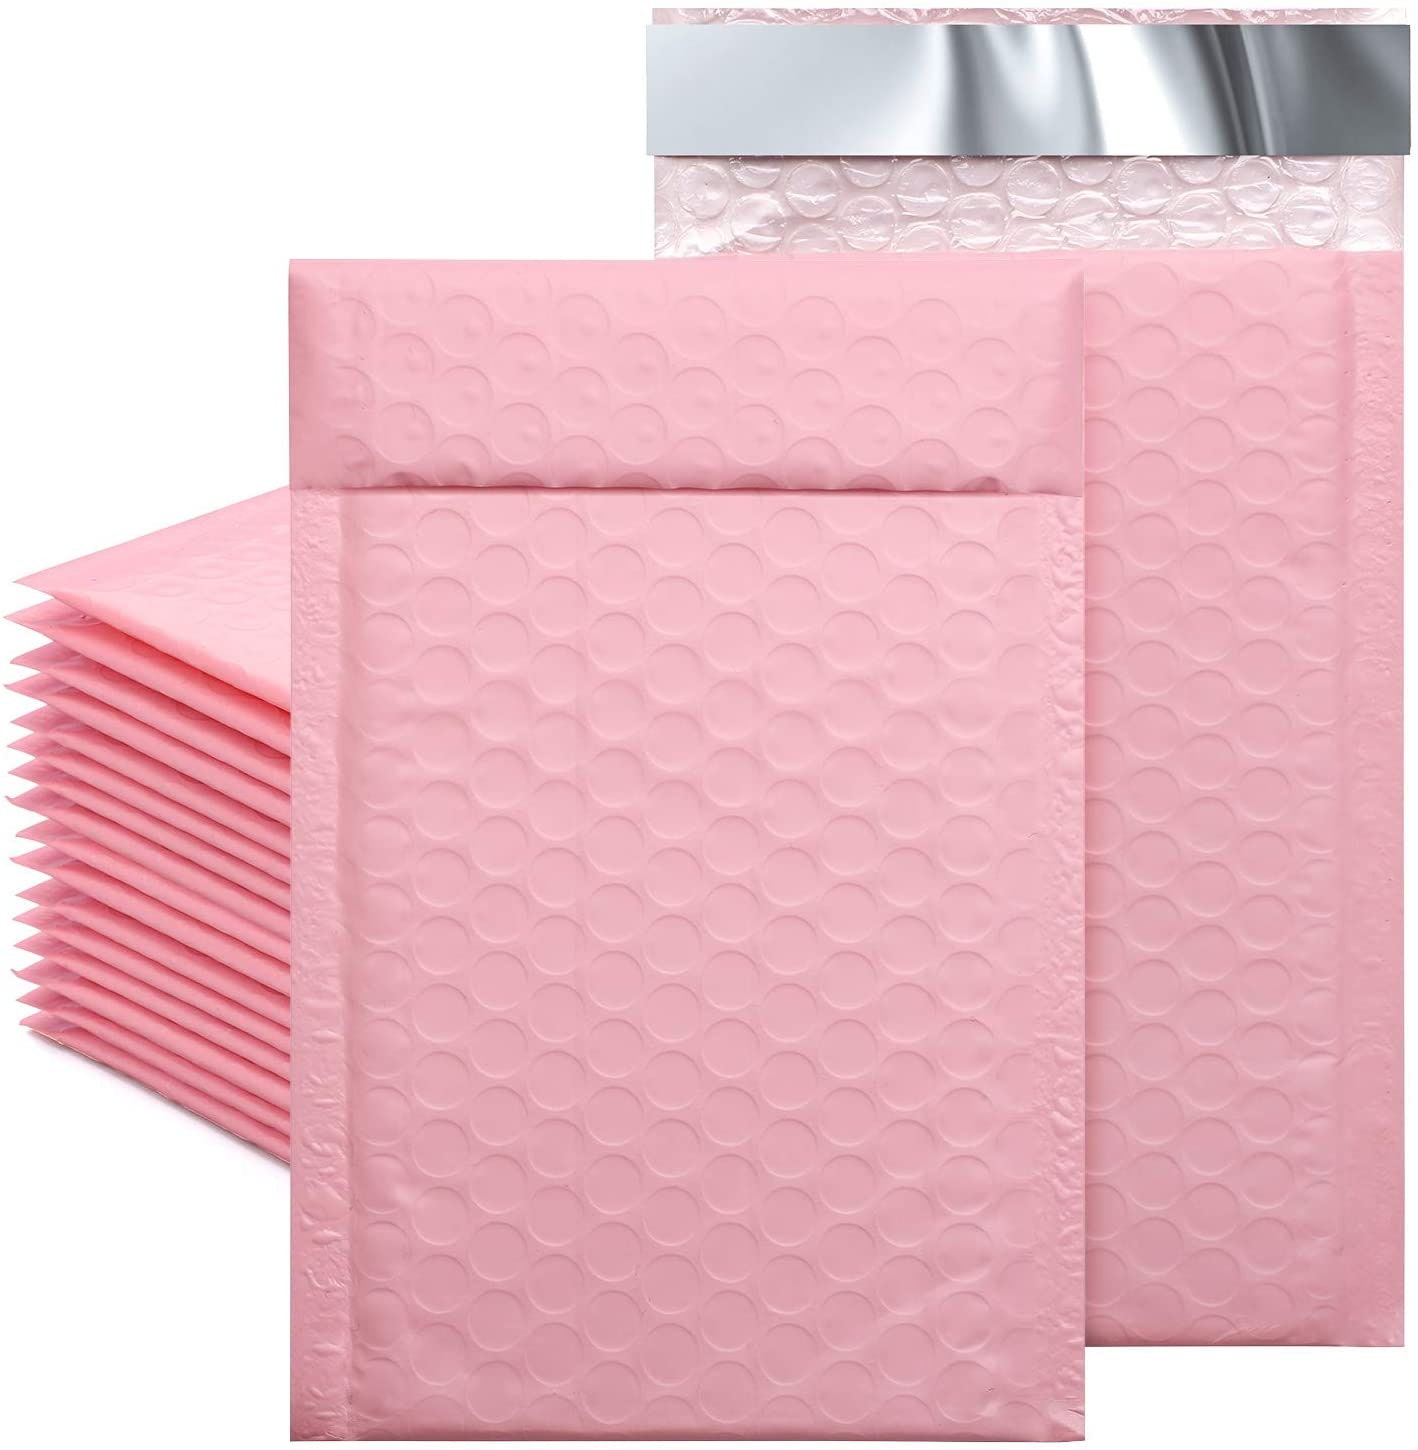 10pcs 9x6 Inch Poly Bubble Mailer Pink Self Seal Padded Envelopes/mailing  n 